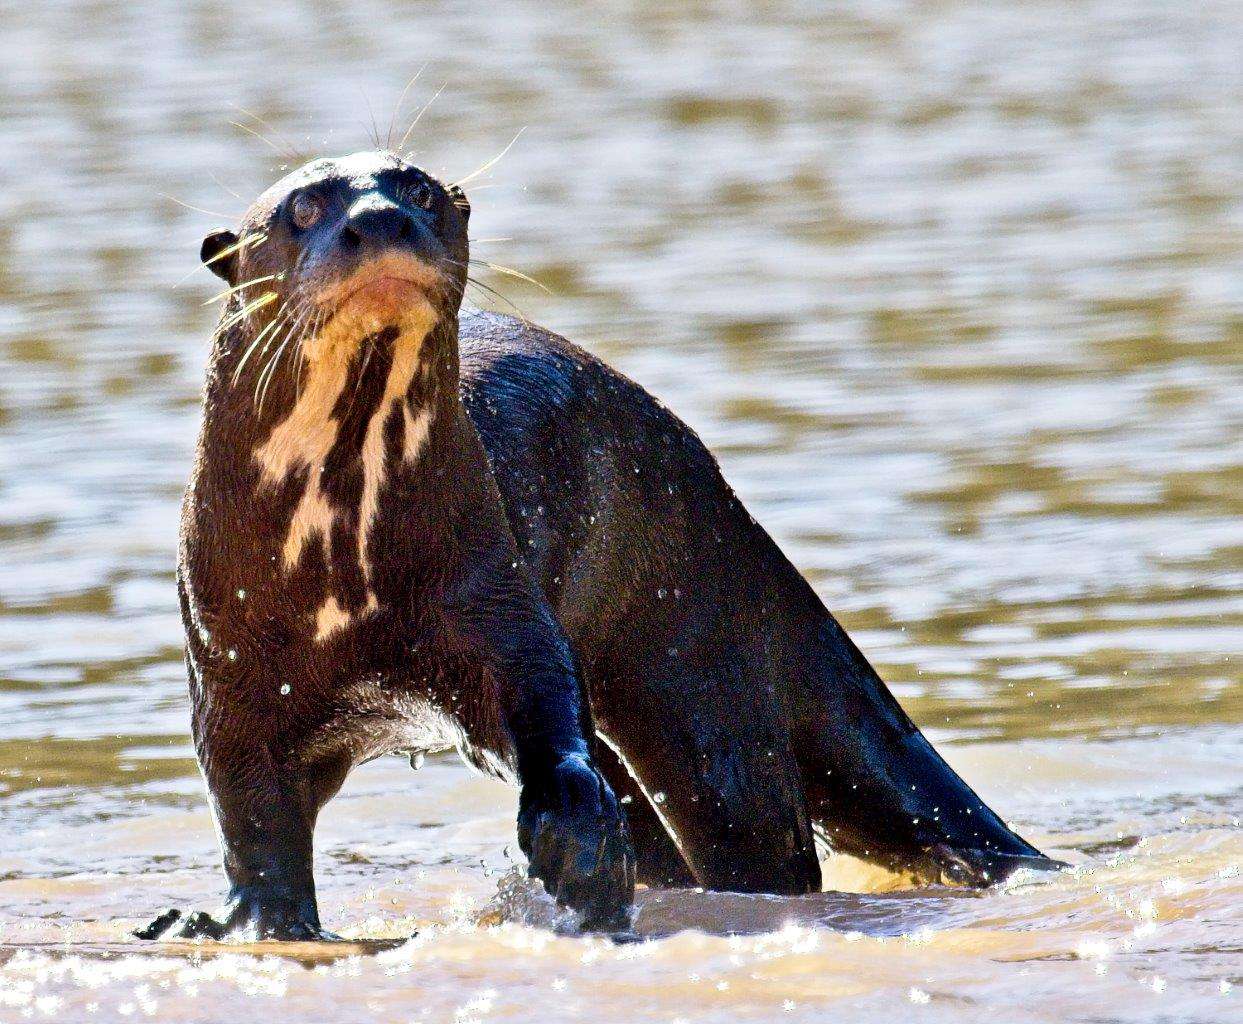 Giant river otter in the Pantanal